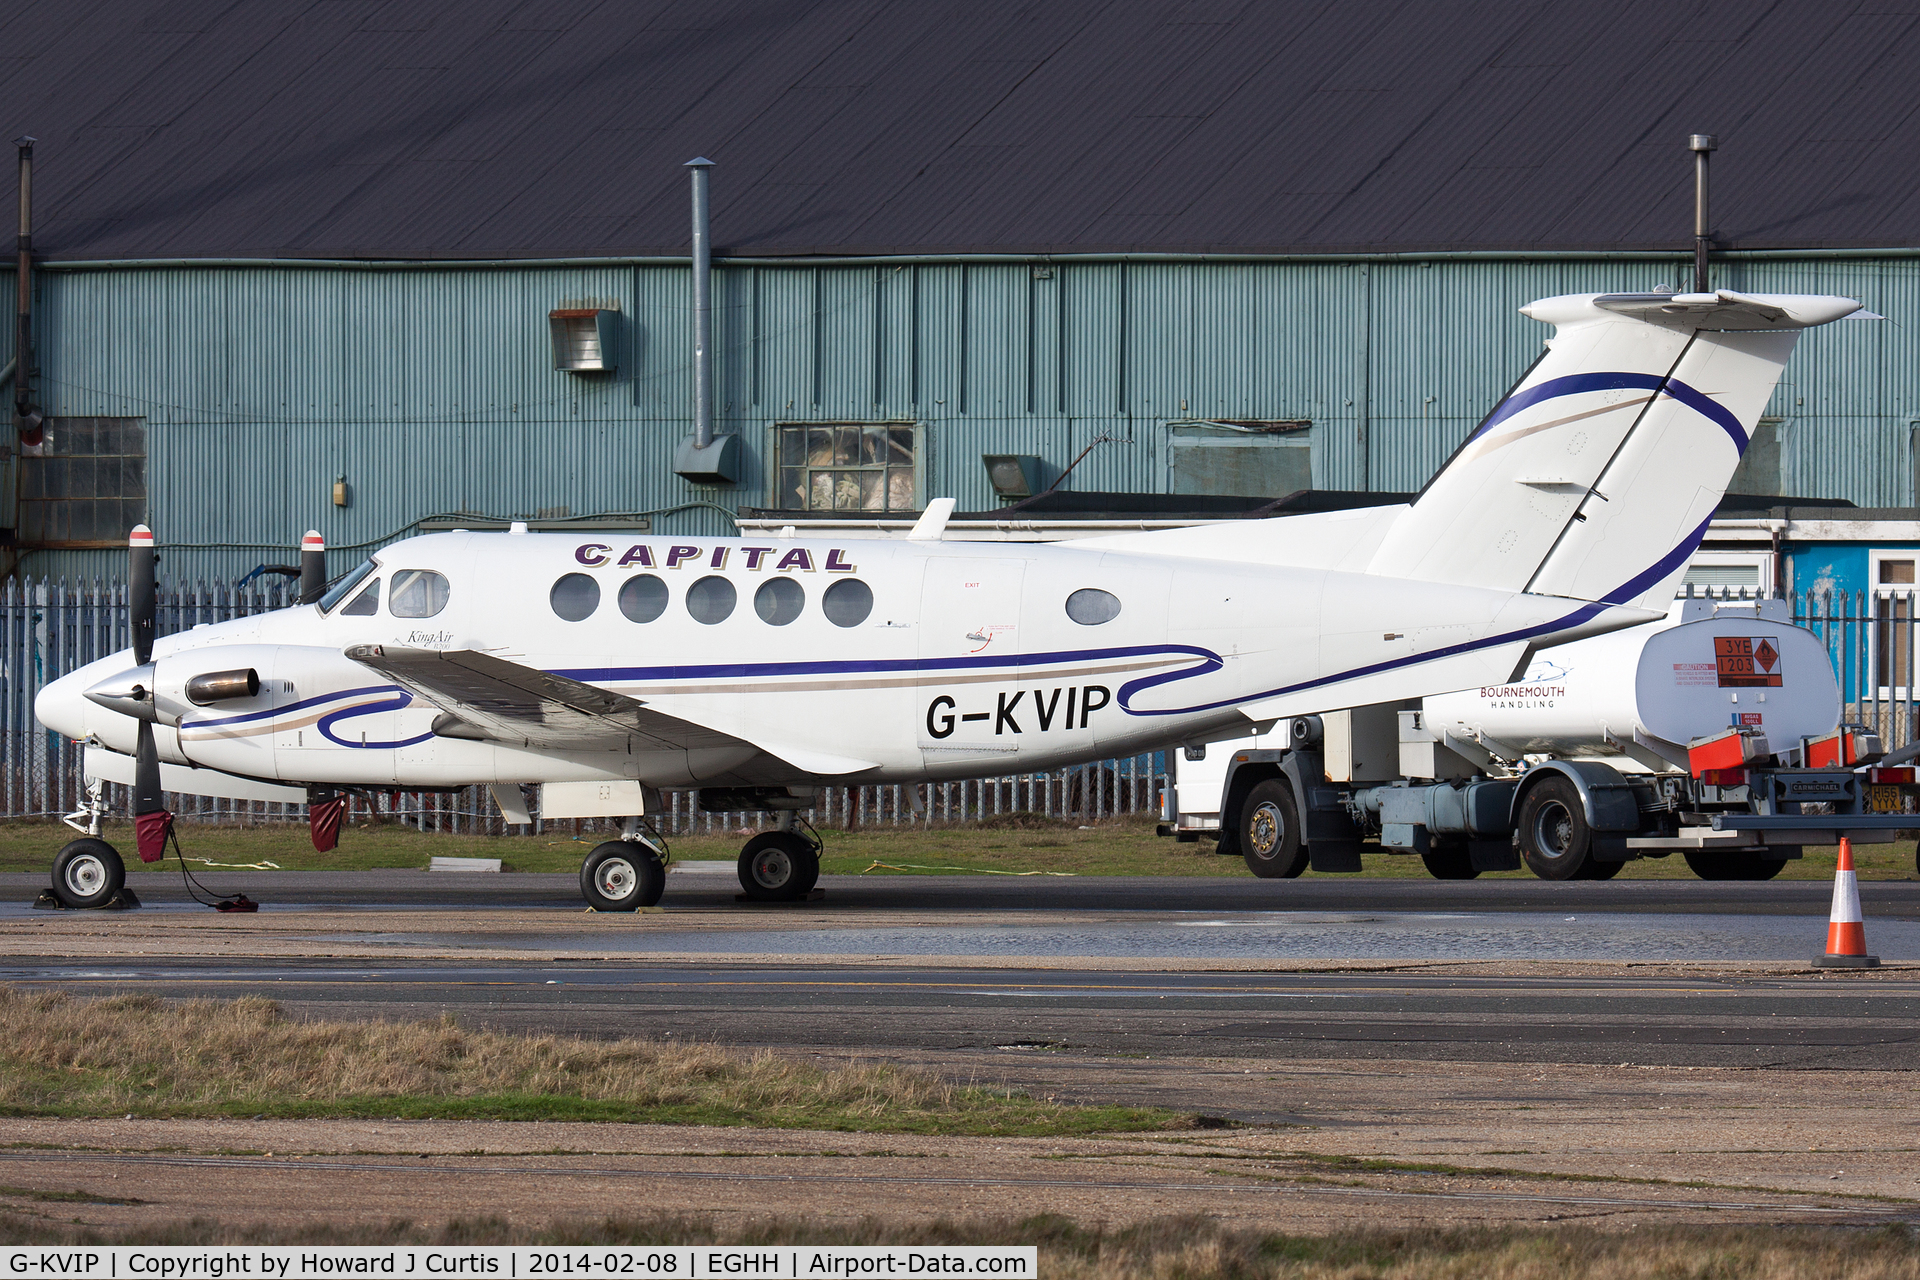 G-KVIP, 1979 Beech 200 Super King Air C/N BB-487, Capital Aviation, a regular visitor. Here with Bournemouth Handling.